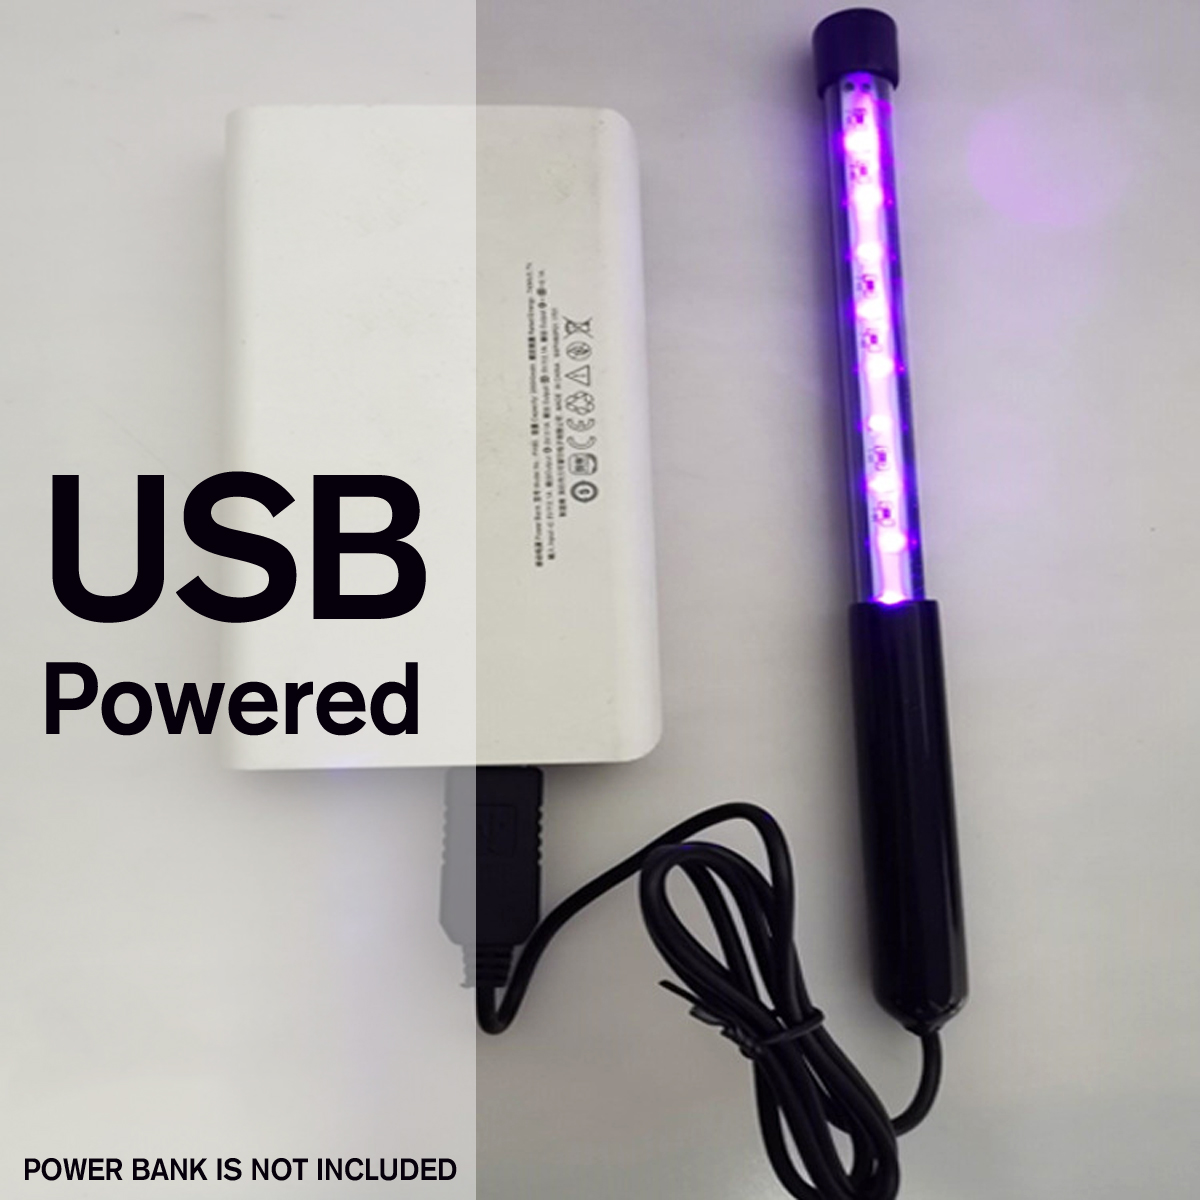 Find Mobile UV Disinfection Lamp USB Charging Portable Disinfection Stick Uv Mask Germicidal Lamp Rod Sterilizer Mites Light Lamp for Sale on Gipsybee.com with cryptocurrencies